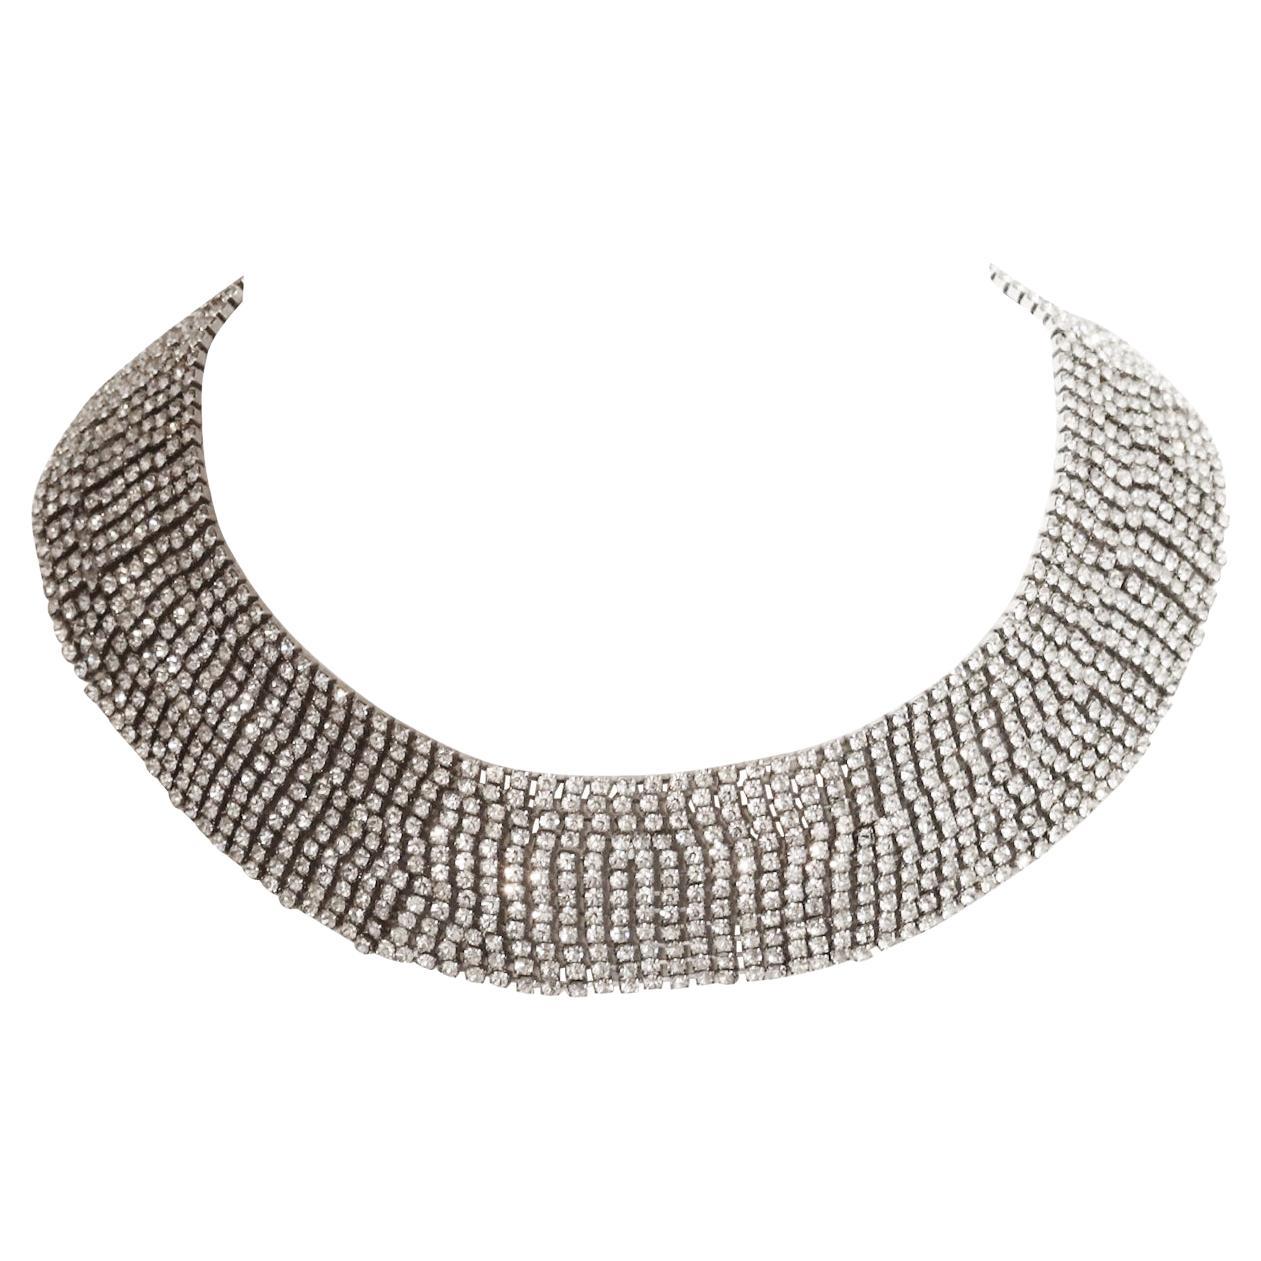 Vintage Pauline Trigere Diamante Wide Collar Necklace Circa 1980s. A great necklace that could easily be worn with t shirt and jeans and mixed with a gold necklace as well as it can be worn for a dressed up occasion. Just one of the classics that